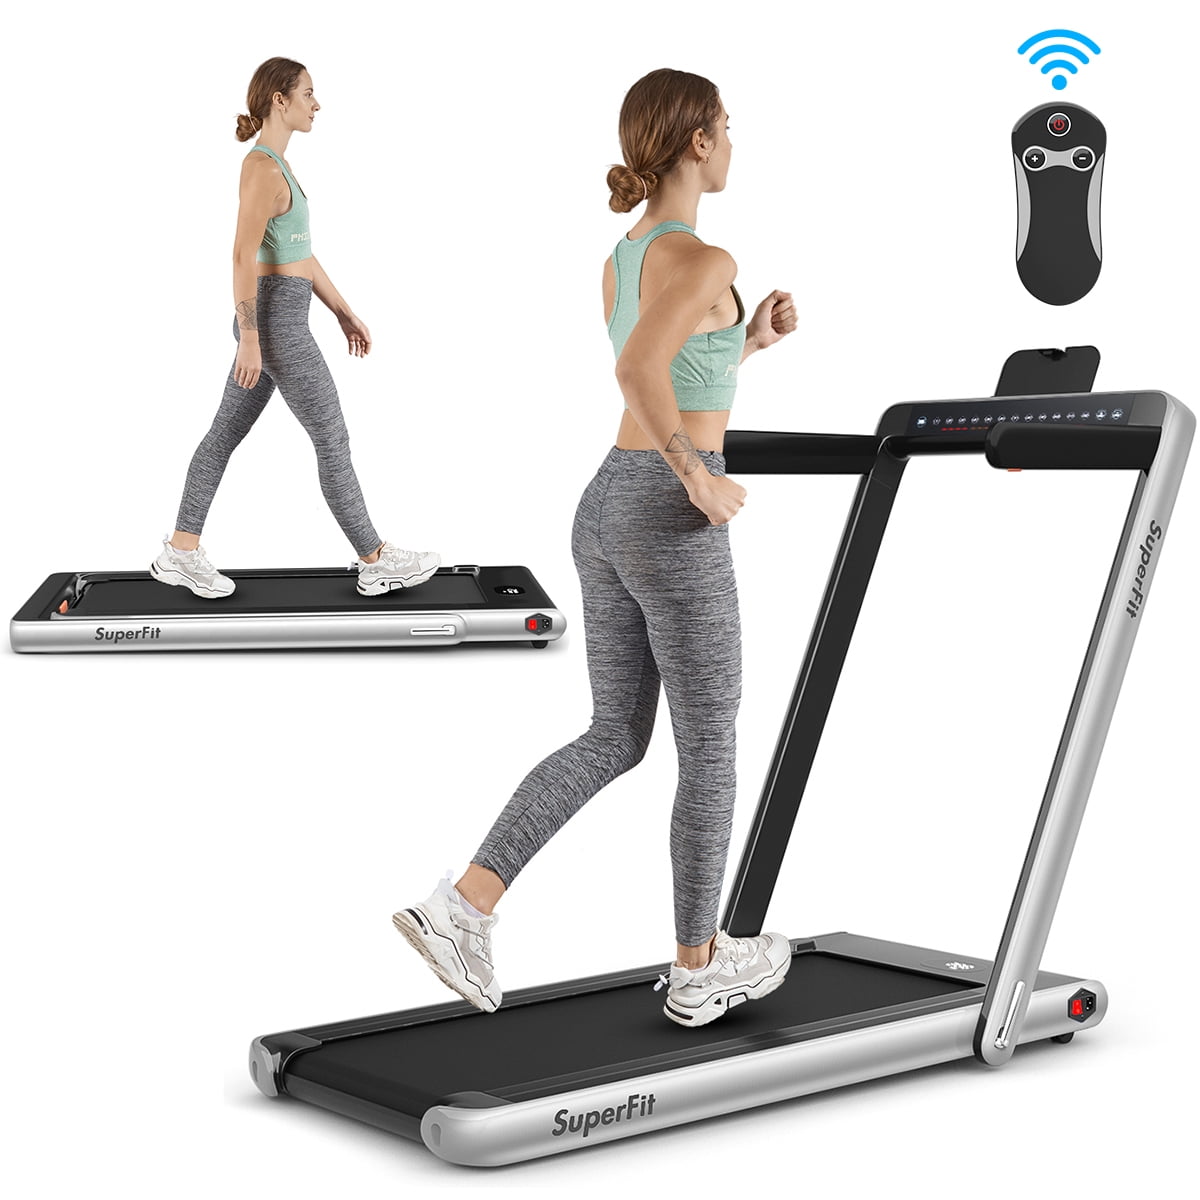 Goplus 2 in 1 Folding Treadmill with Dual Display Remote Control 2.25HP Under Desk Electric Pad Treadmill Bluetooth Speaker Walking Jogging Machine for Home/Office Use Installation-Free 